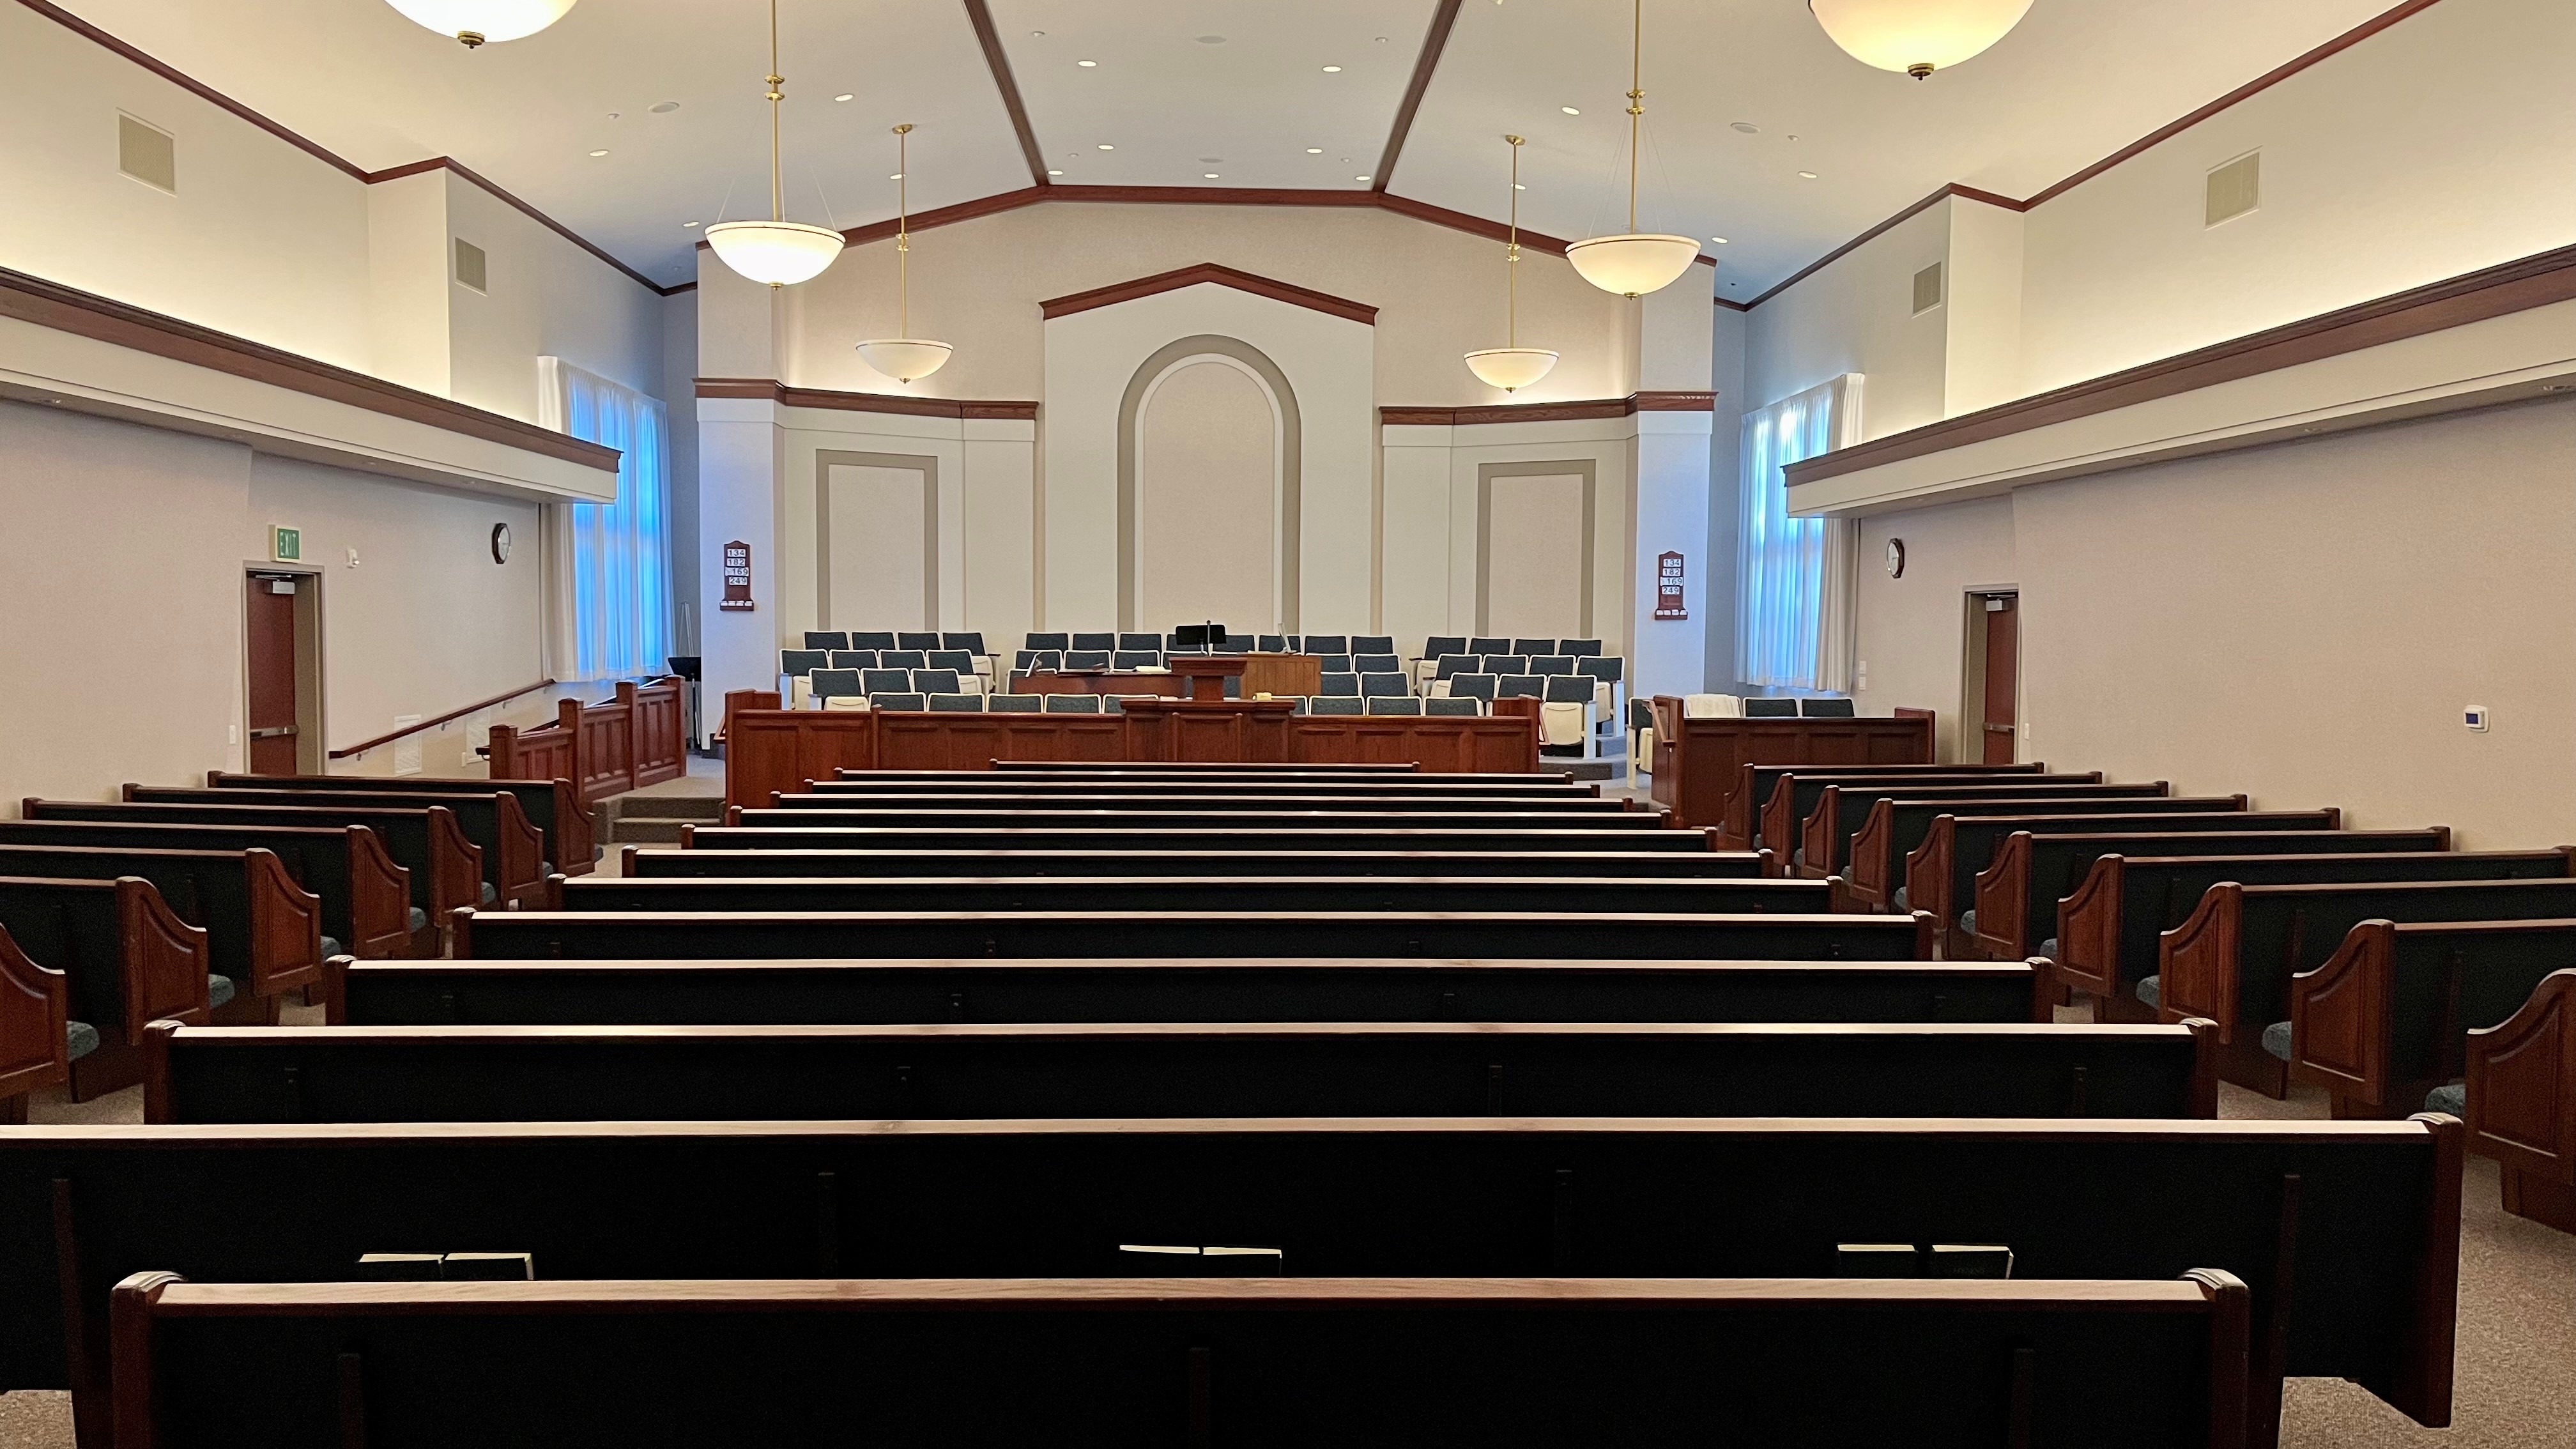 View of the meetinghouse chapel where the first hour of meetings will take place.